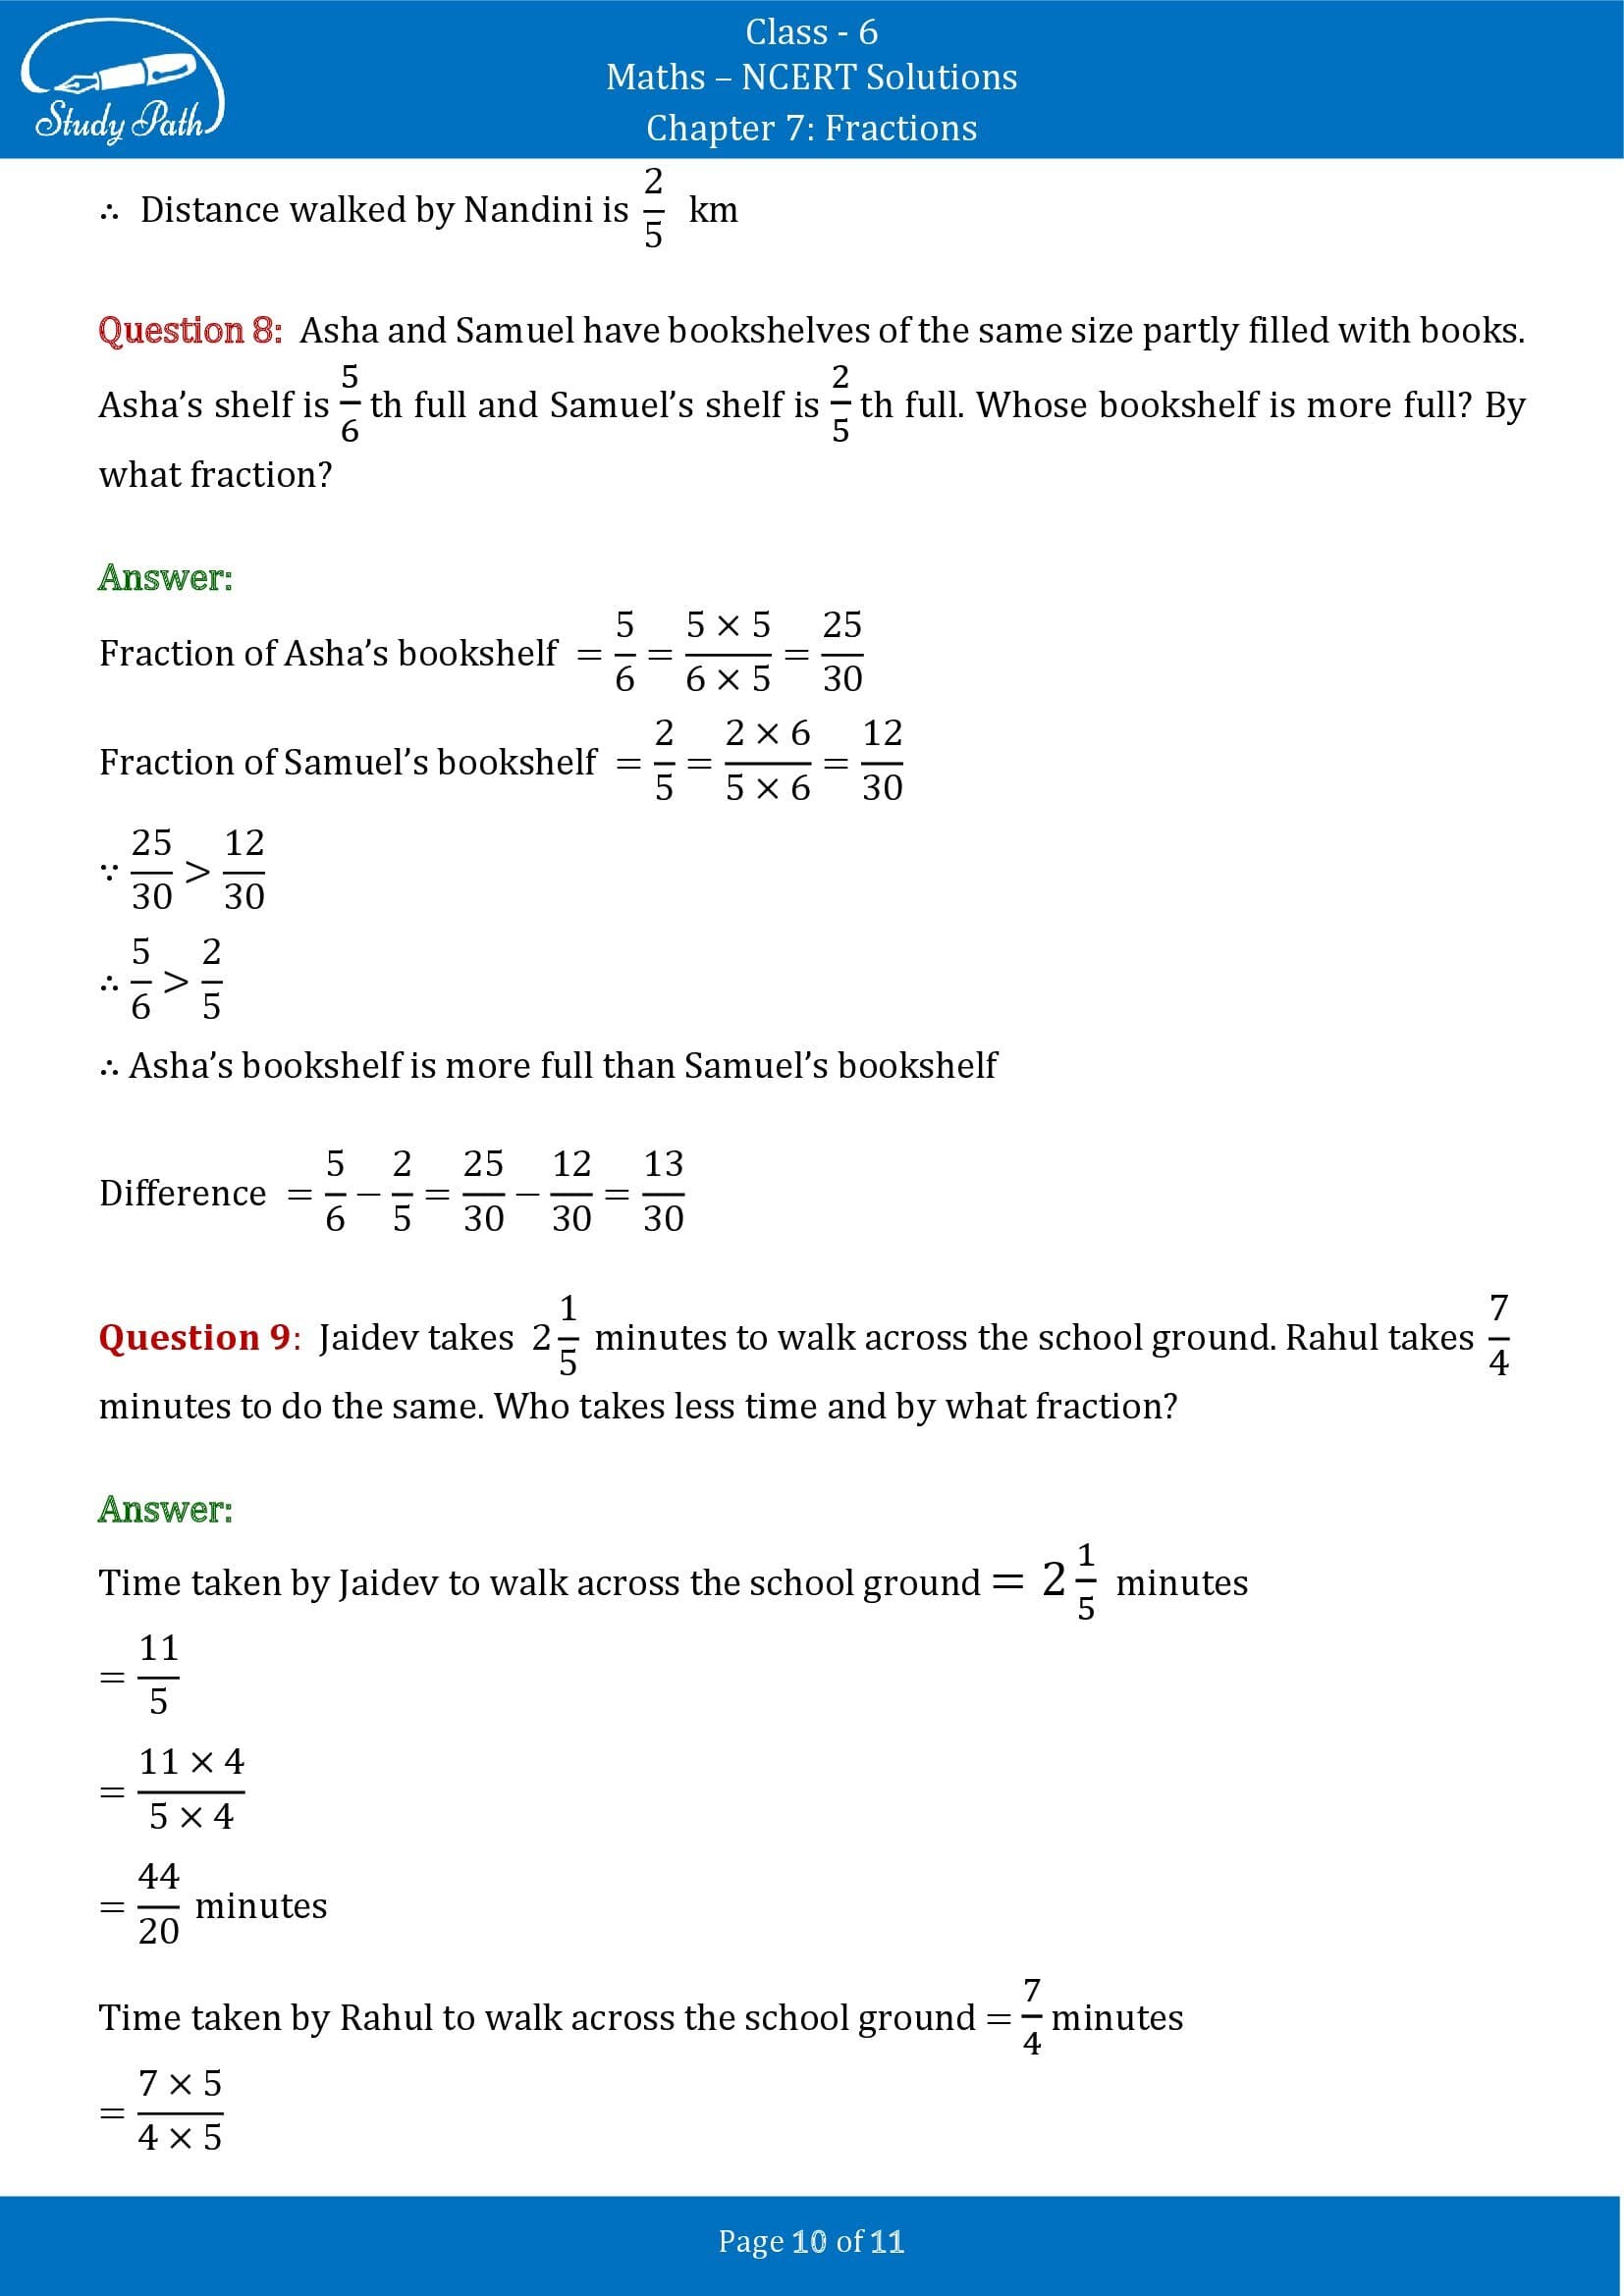 NCERT Solutions for Class 6 Maths Chapter 7 Fractions Exercise 7.6 0010